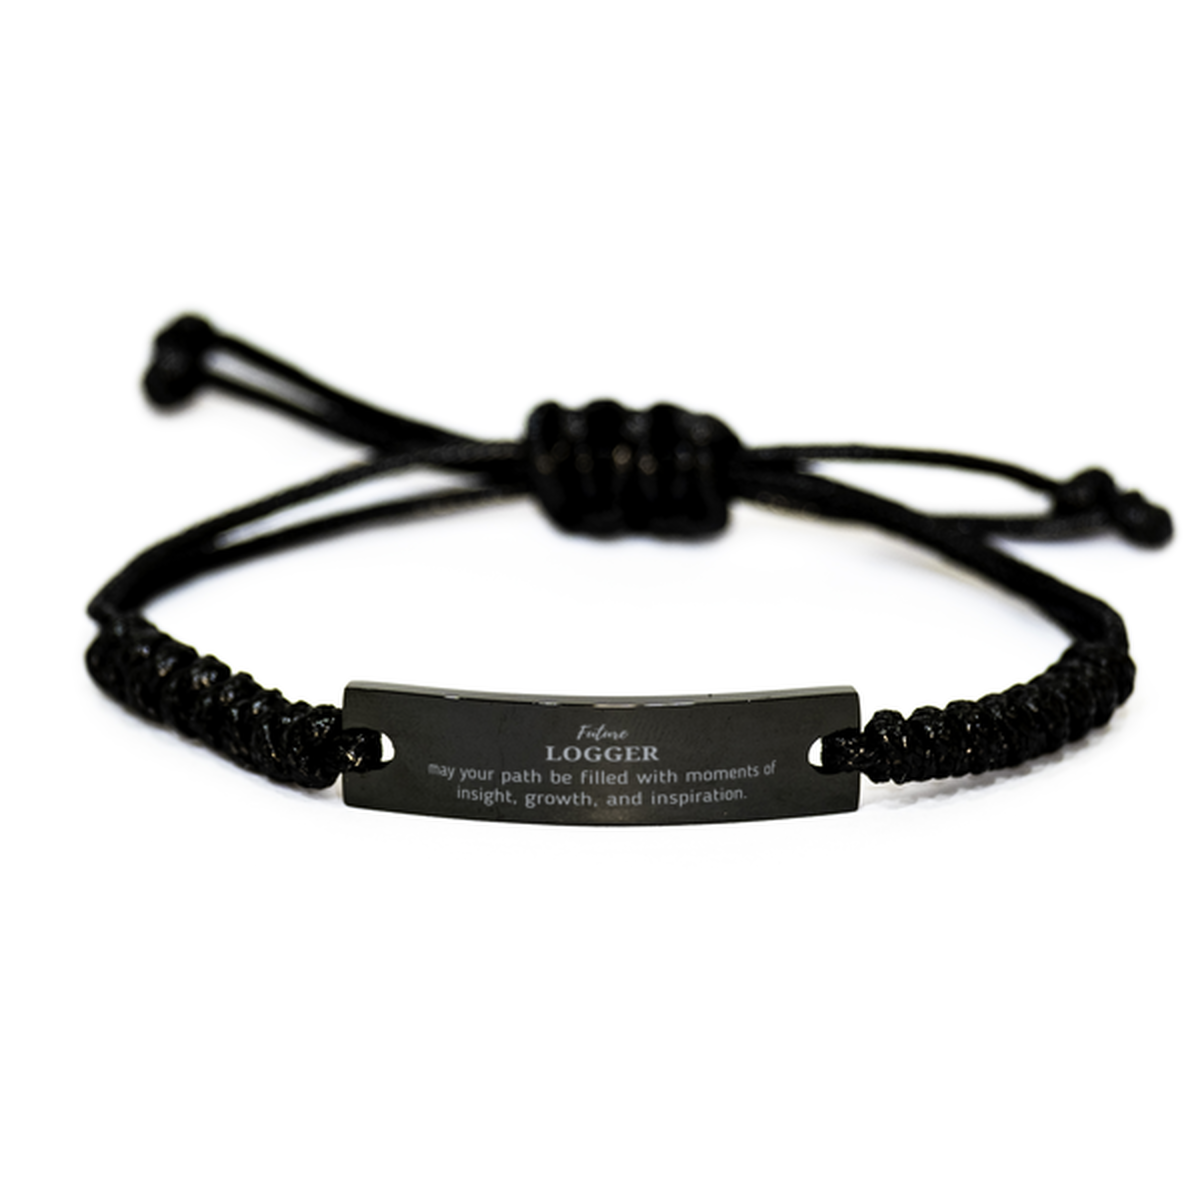 Future Logger Gifts, May your path be filled with moments of insight, Graduation Gifts for New Logger, Christmas Unique Black Rope Bracelet For Men, Women, Friends